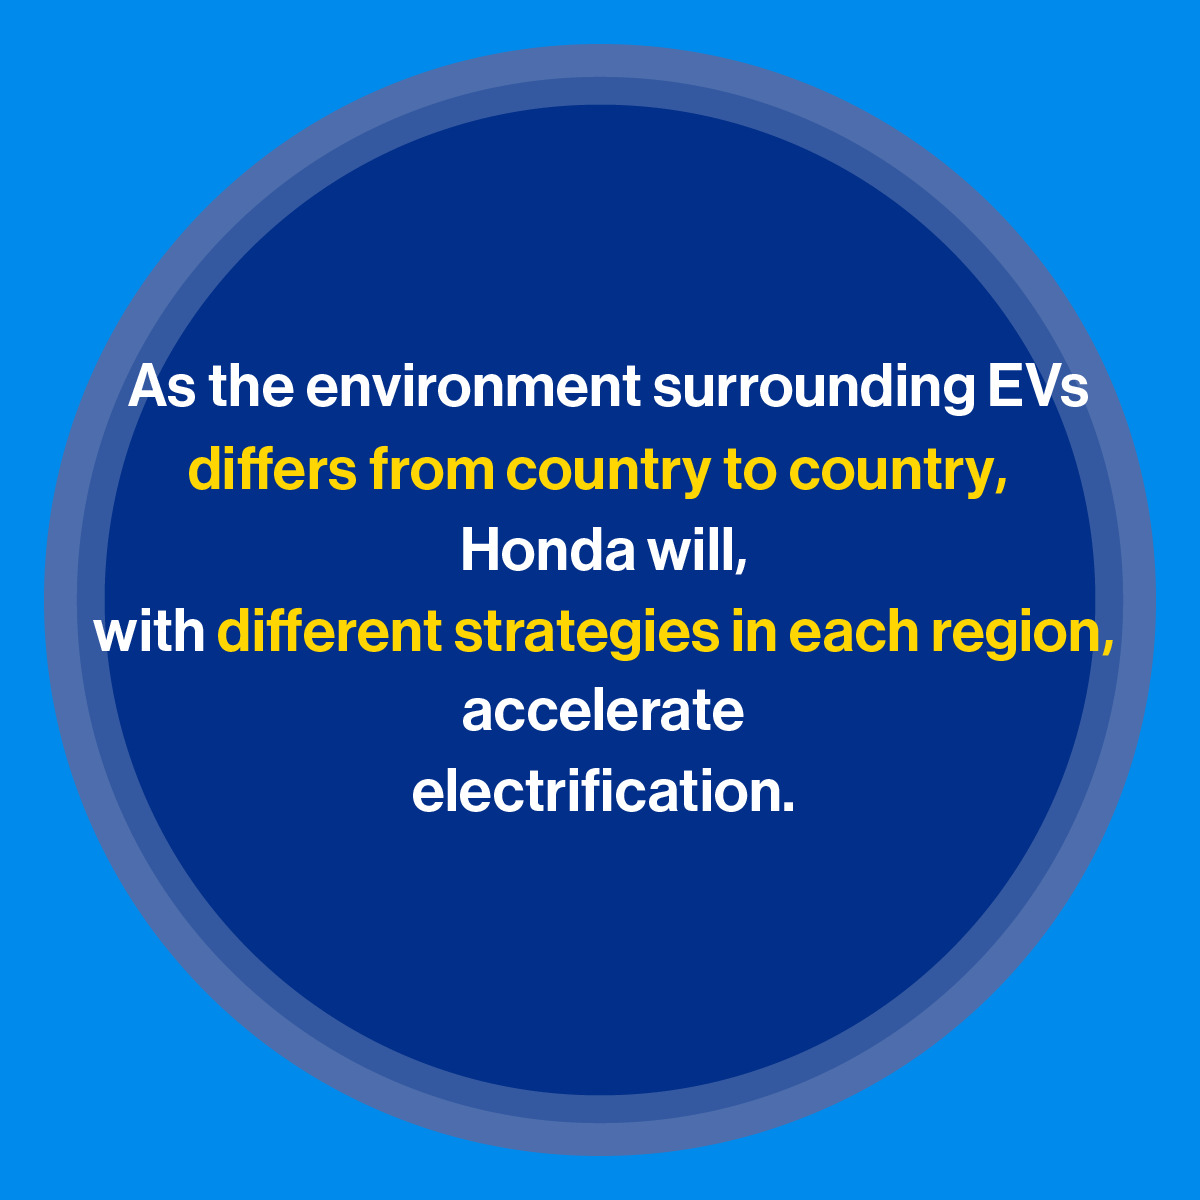 Honda will, with different strategies in each region, accelerate electrification